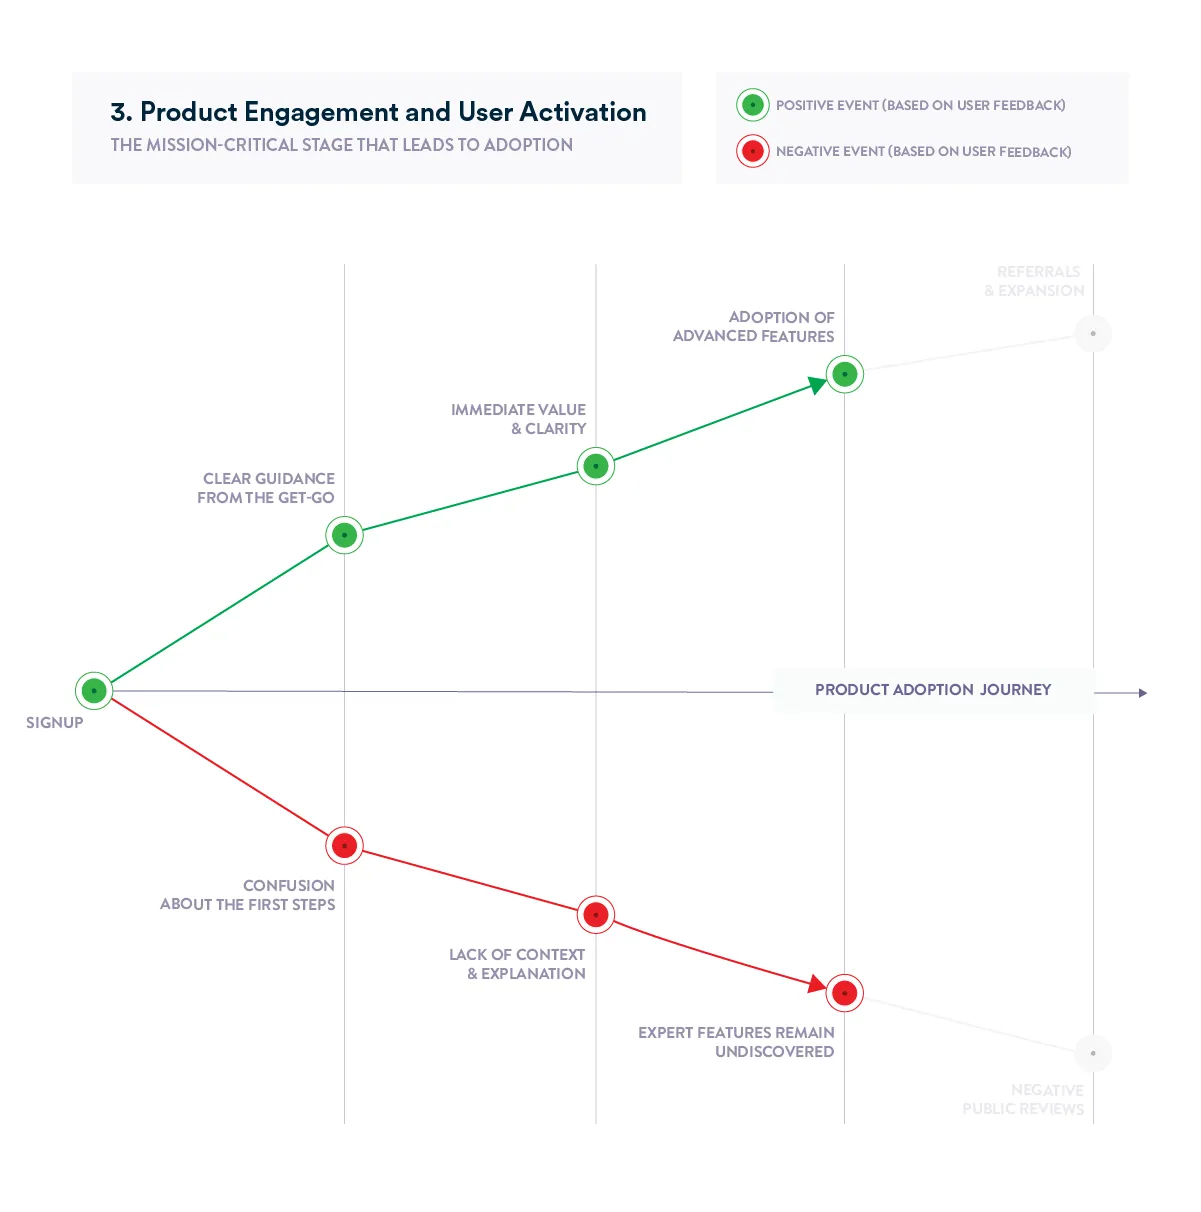 Product Adoption Journey chart - Product engagement and user activation